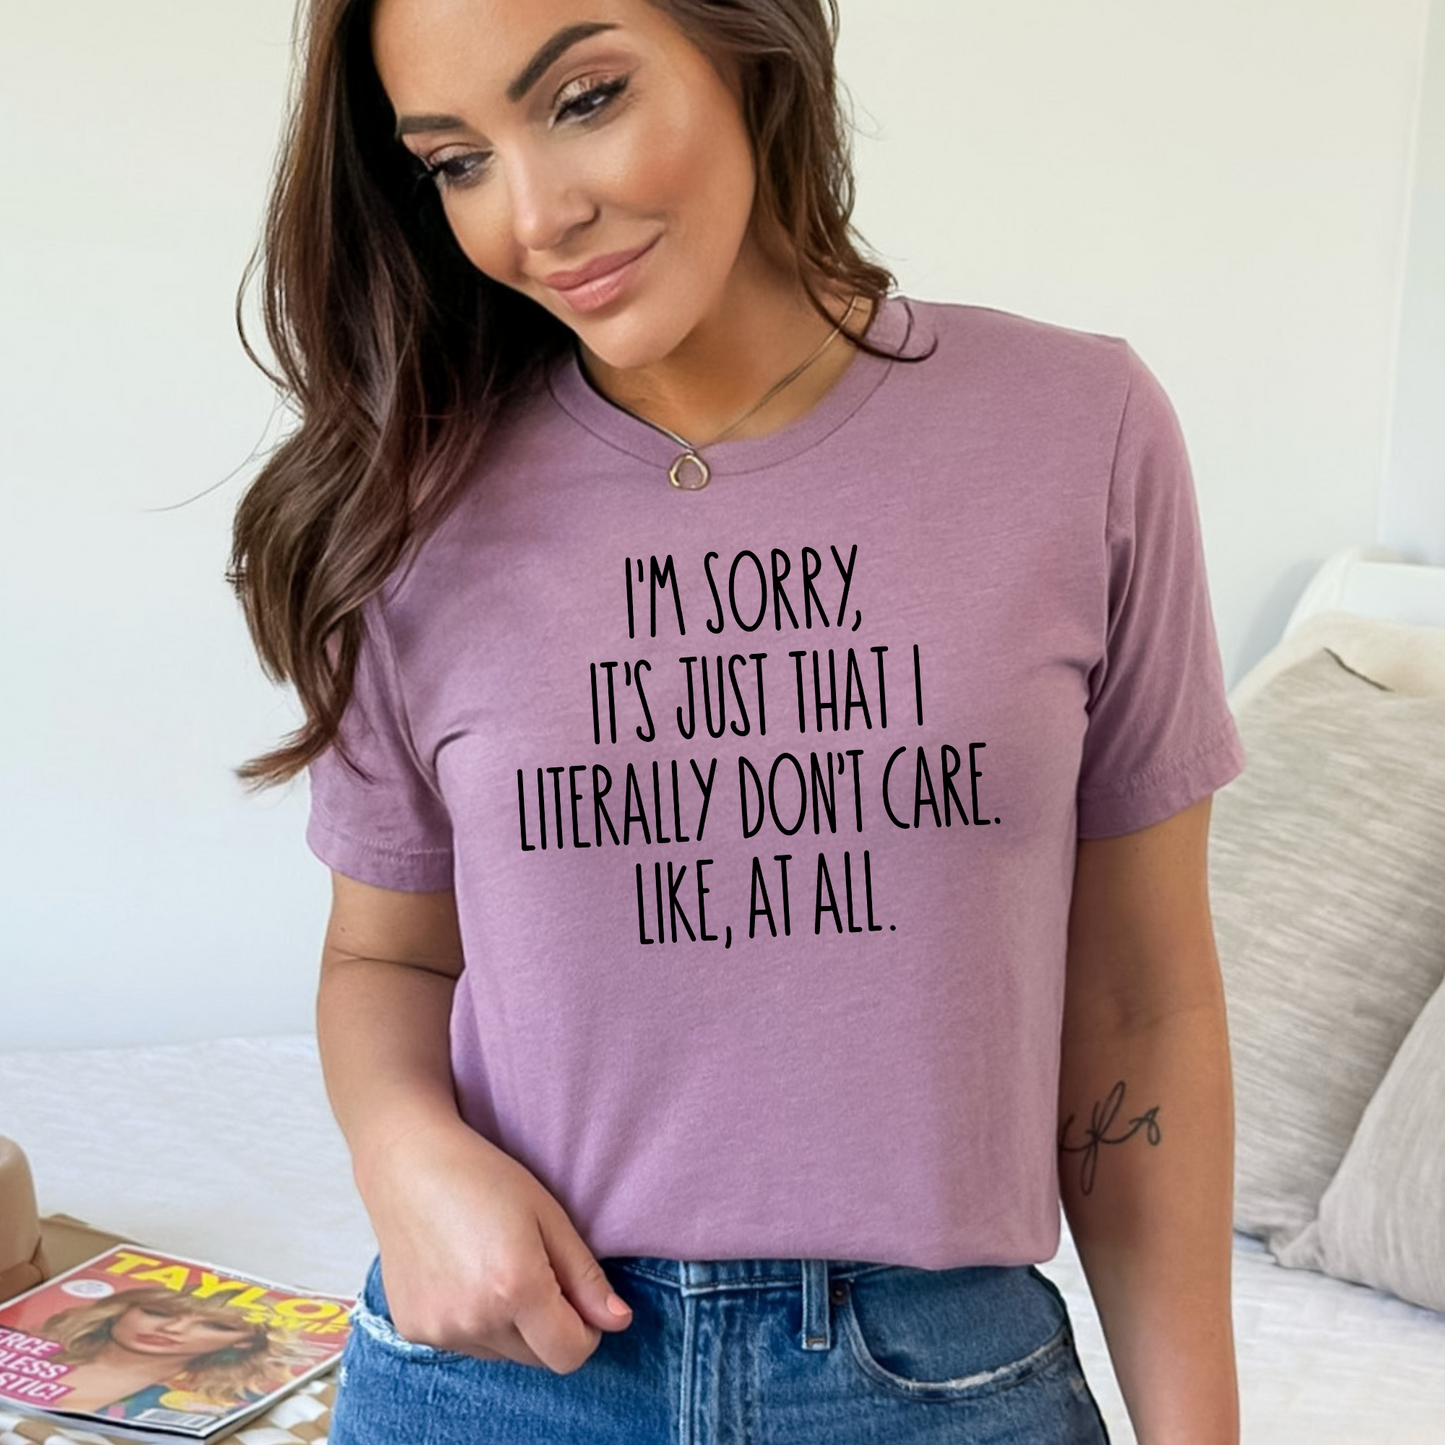 I'm Sorry, It's Just That I Literally Don't Care, Like At All Crewneck Tee